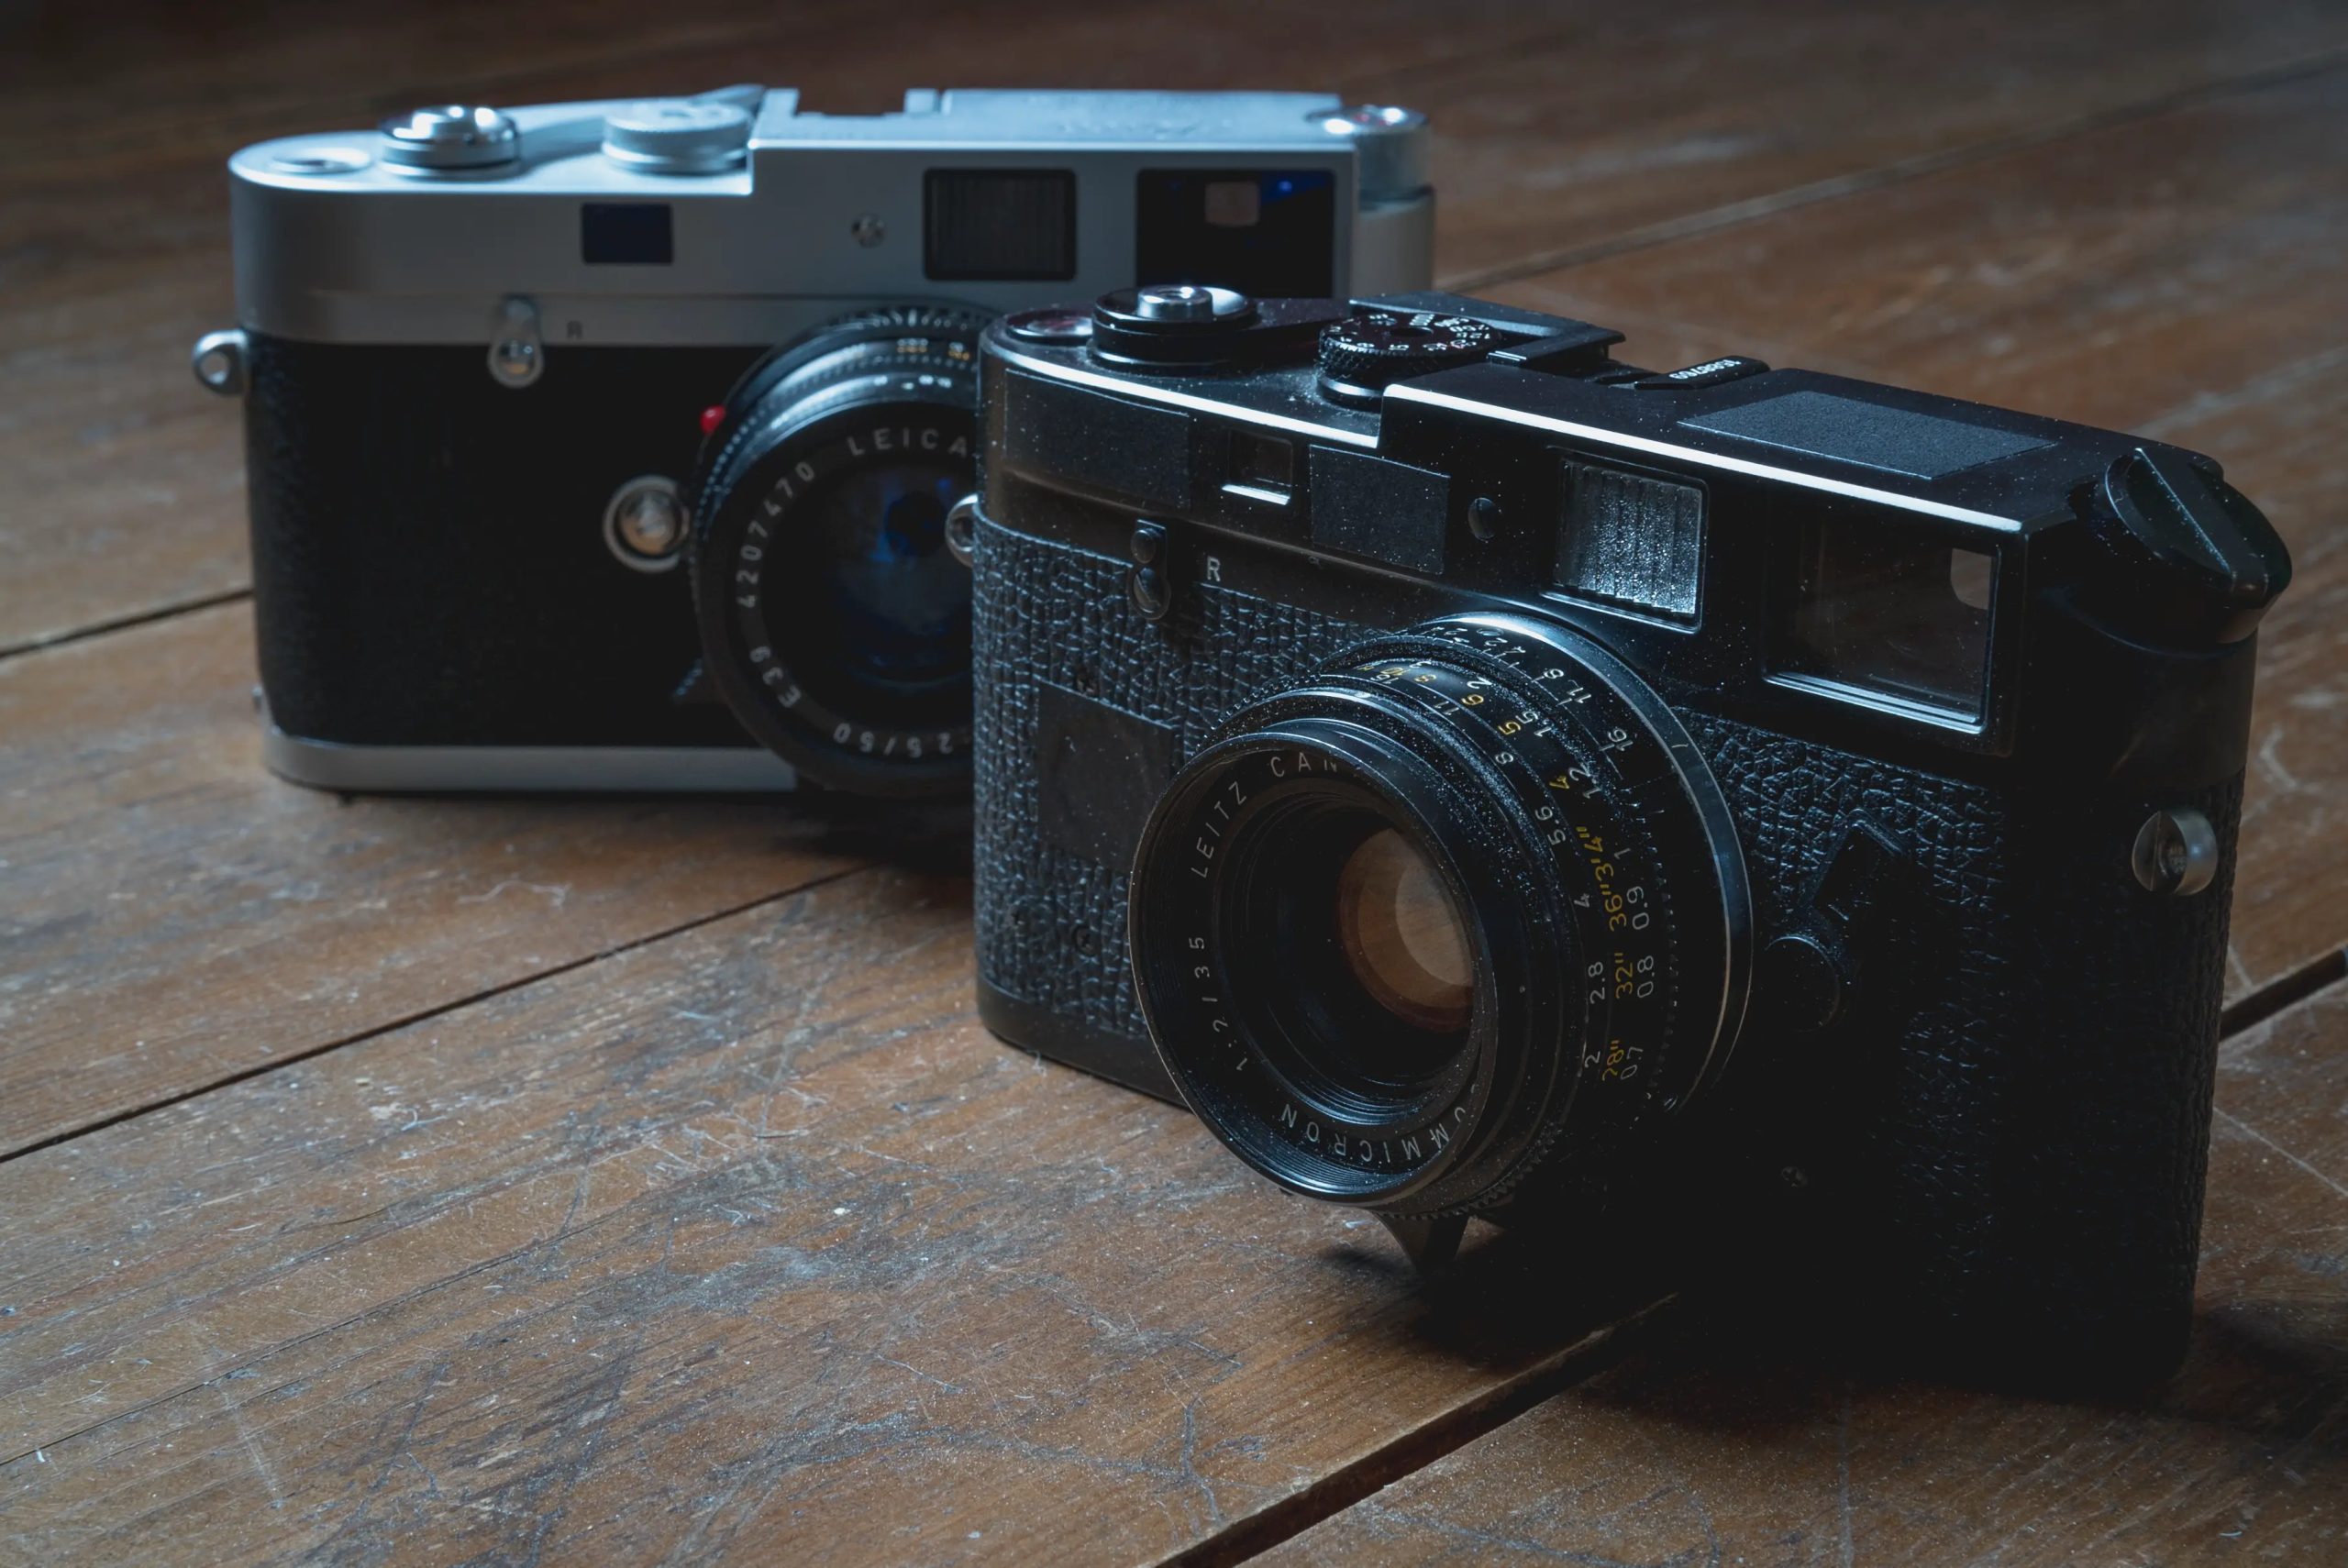 The Leica M-A and M4-P